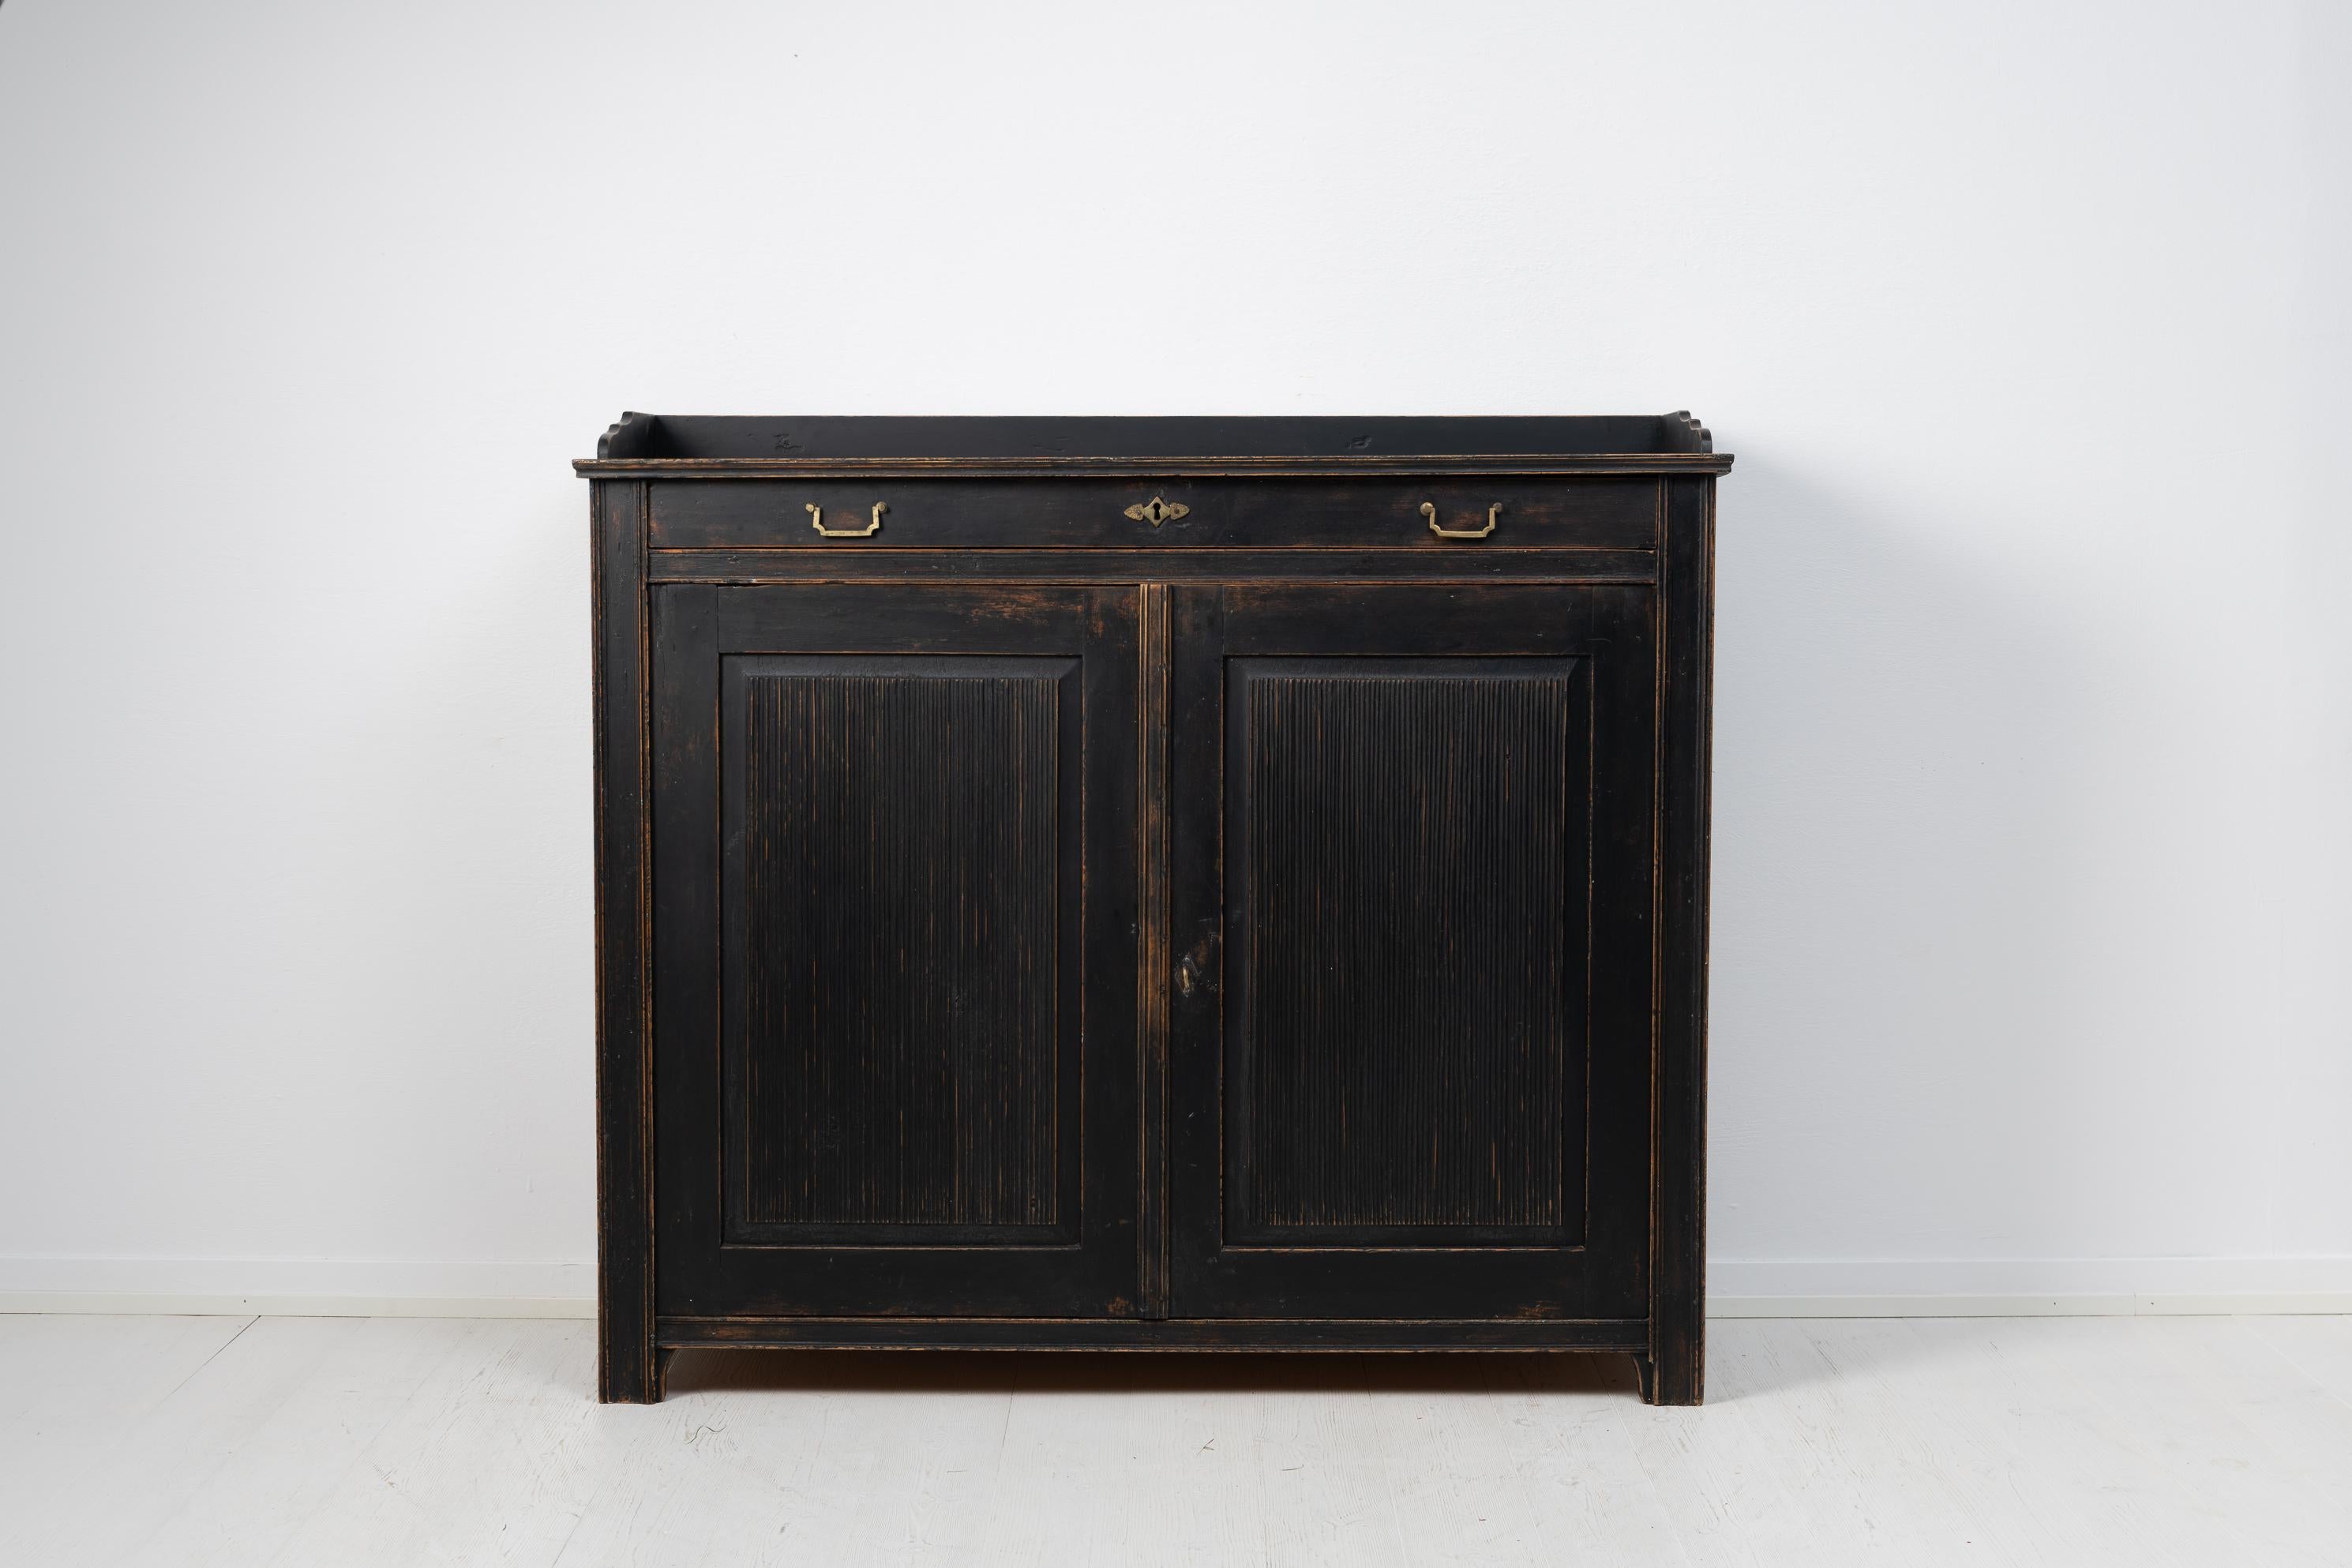 Gustavian style black sideboard from Sweden made during the early 19th century, around 1820. The sideboard is in gustavian style with later black paint which has become distressed. The interior of the sideboard is wood bare with a wide slim drawer